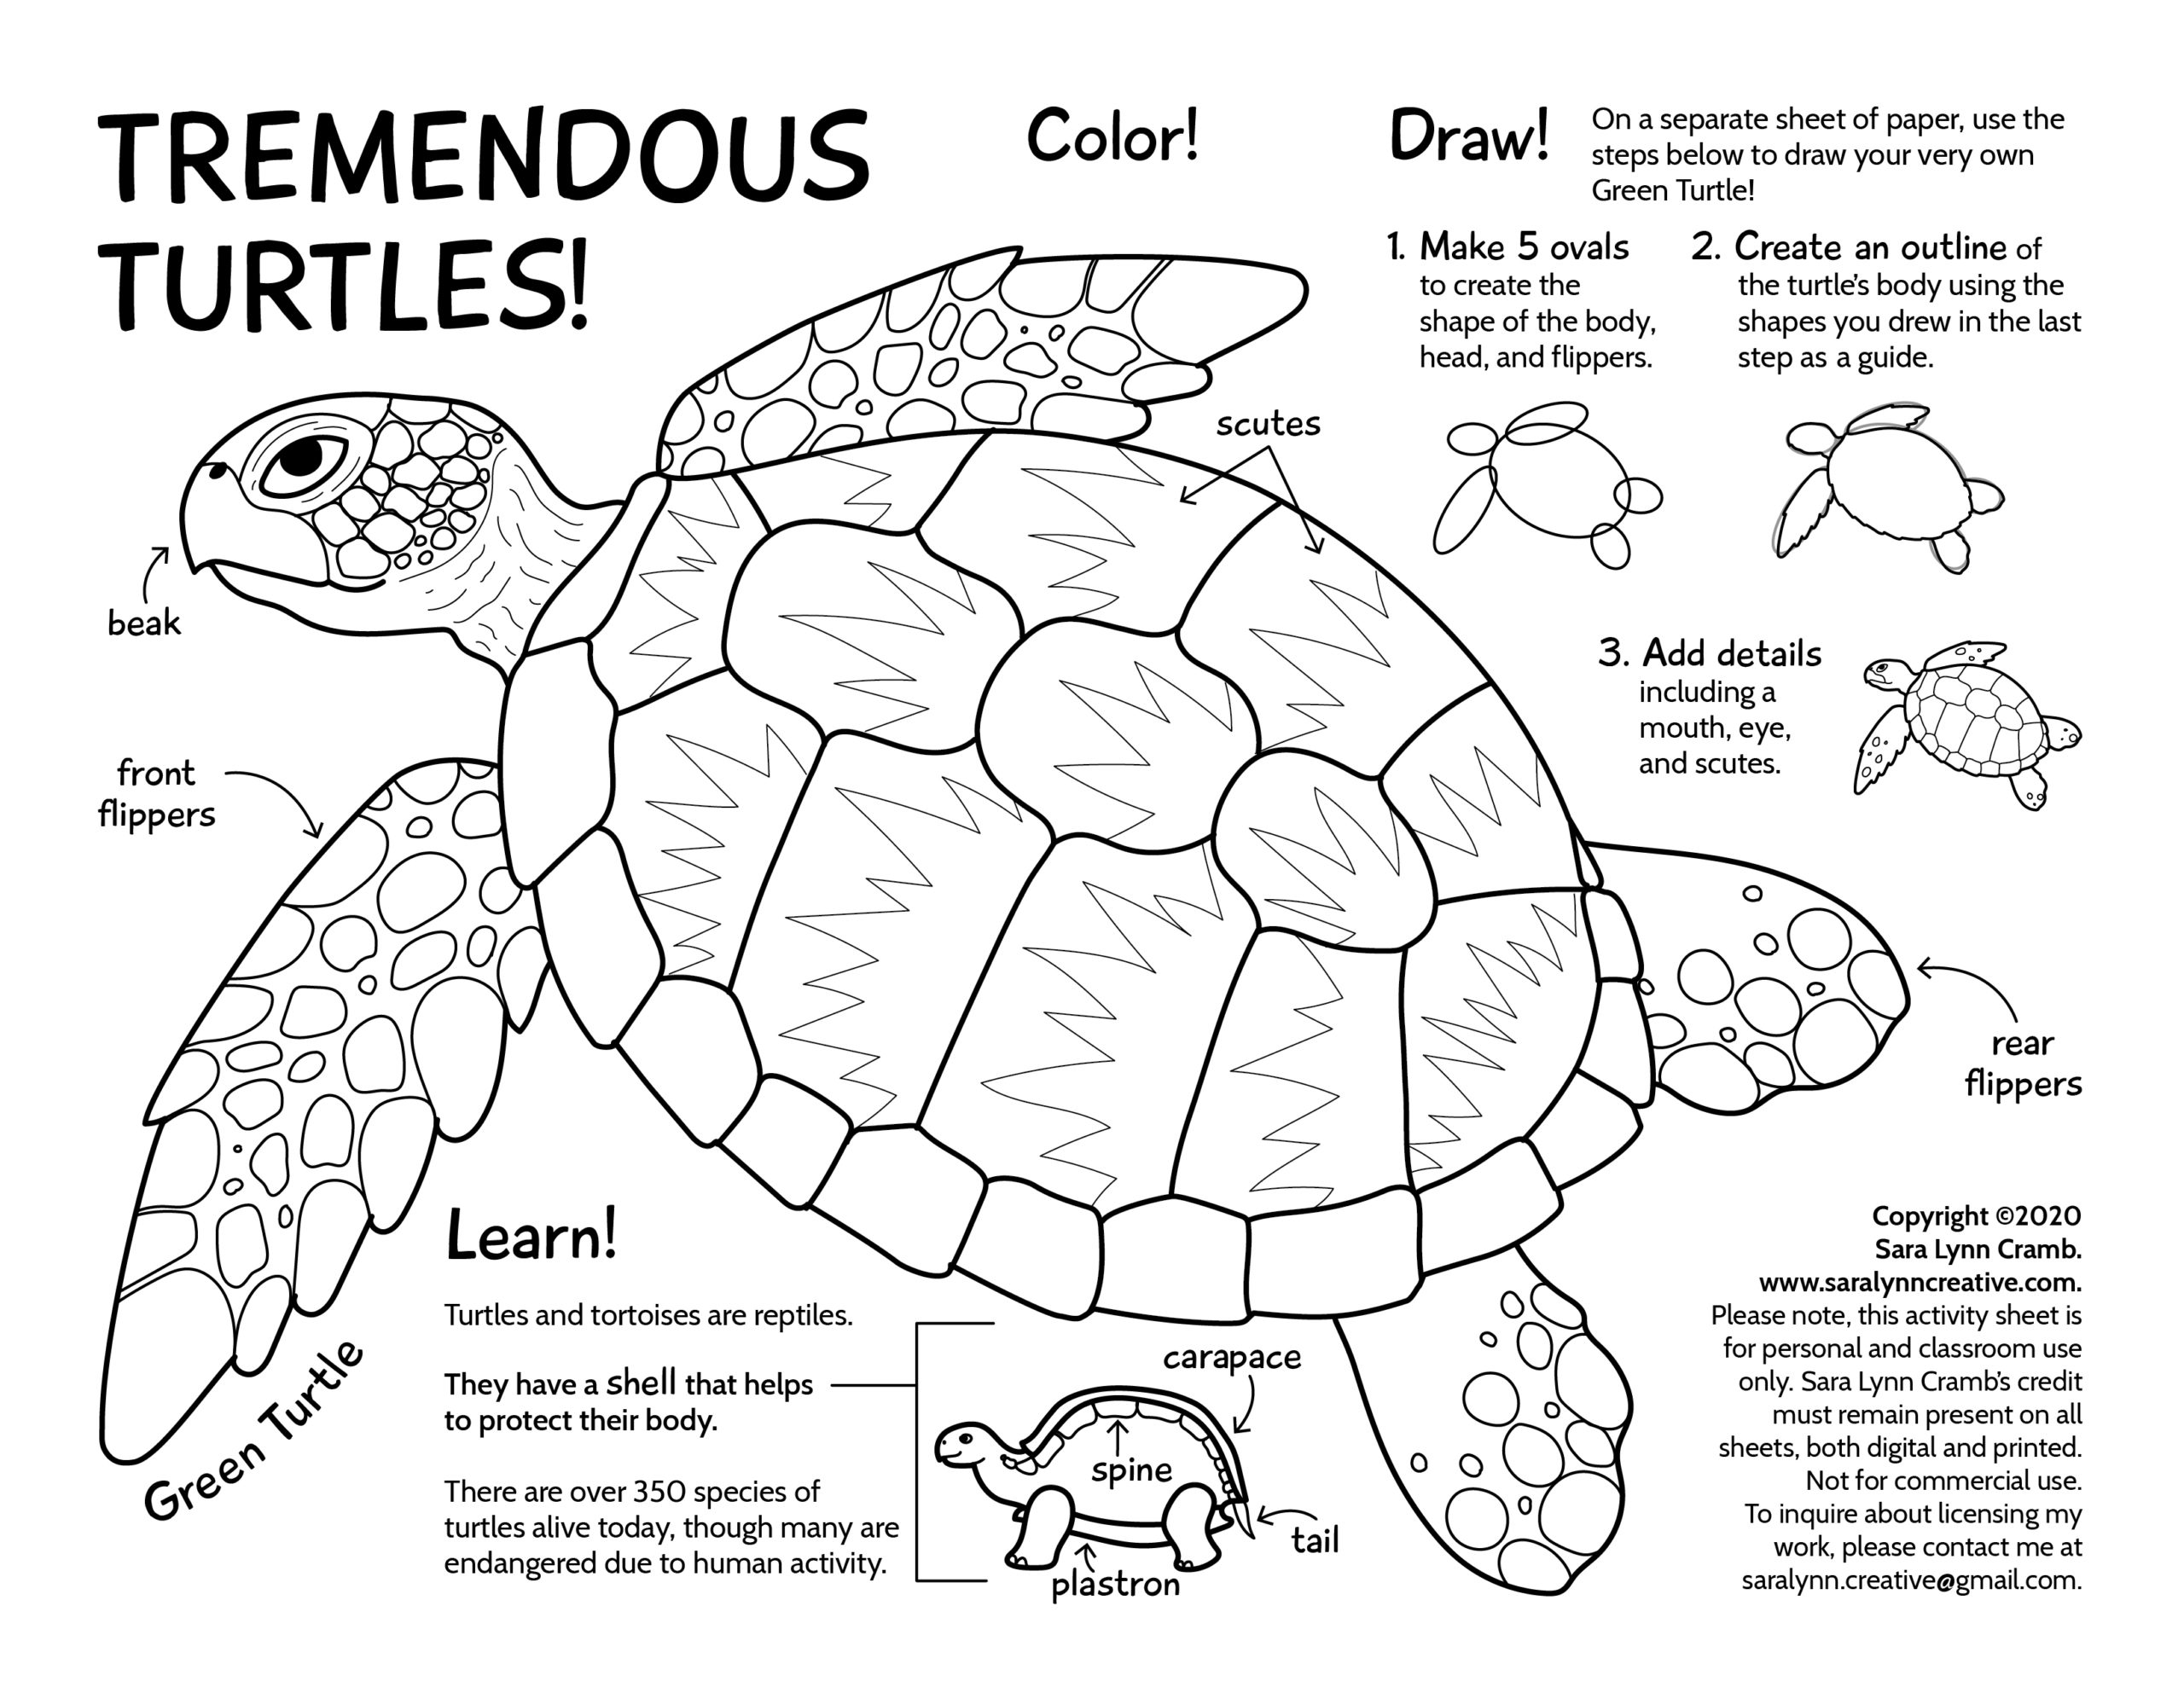 In this turtle coloring page I identify some of the main components of the turtle’s anatomy to help kids understand the basics of the body parts. This, and the other coloring pages I create, are centered on a different theme each month. The pages combine line art illustrations that can be colored in with facts about the animal(s), and occasionally I include additional opportunities for artistic expression with learn-to-draw activities. These coloring pages combine artistic practice with interesting facts in a way that encourages learning and creativity.